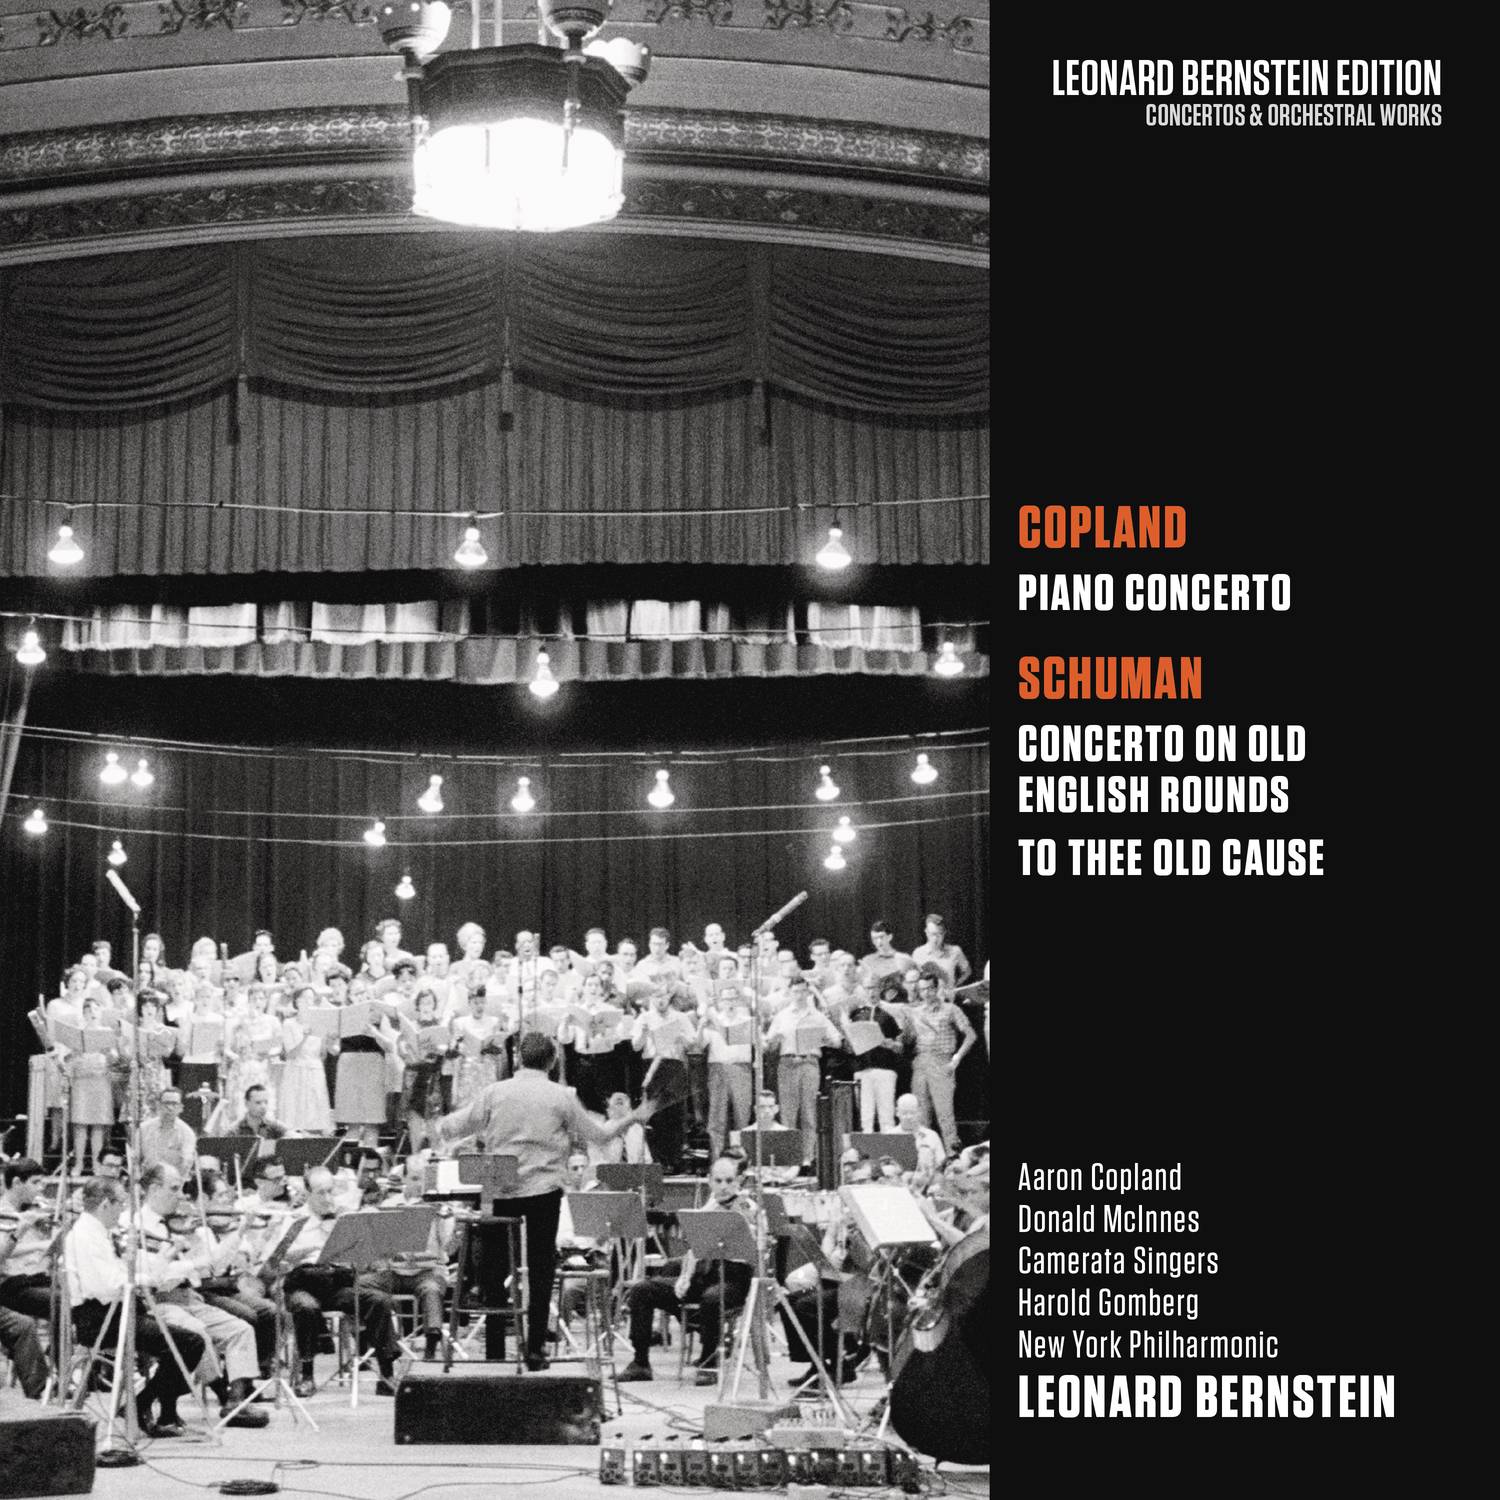 Copland: Piano Concerto - Schuman: Concerto on Old English Rounds & To Thee Old Cause